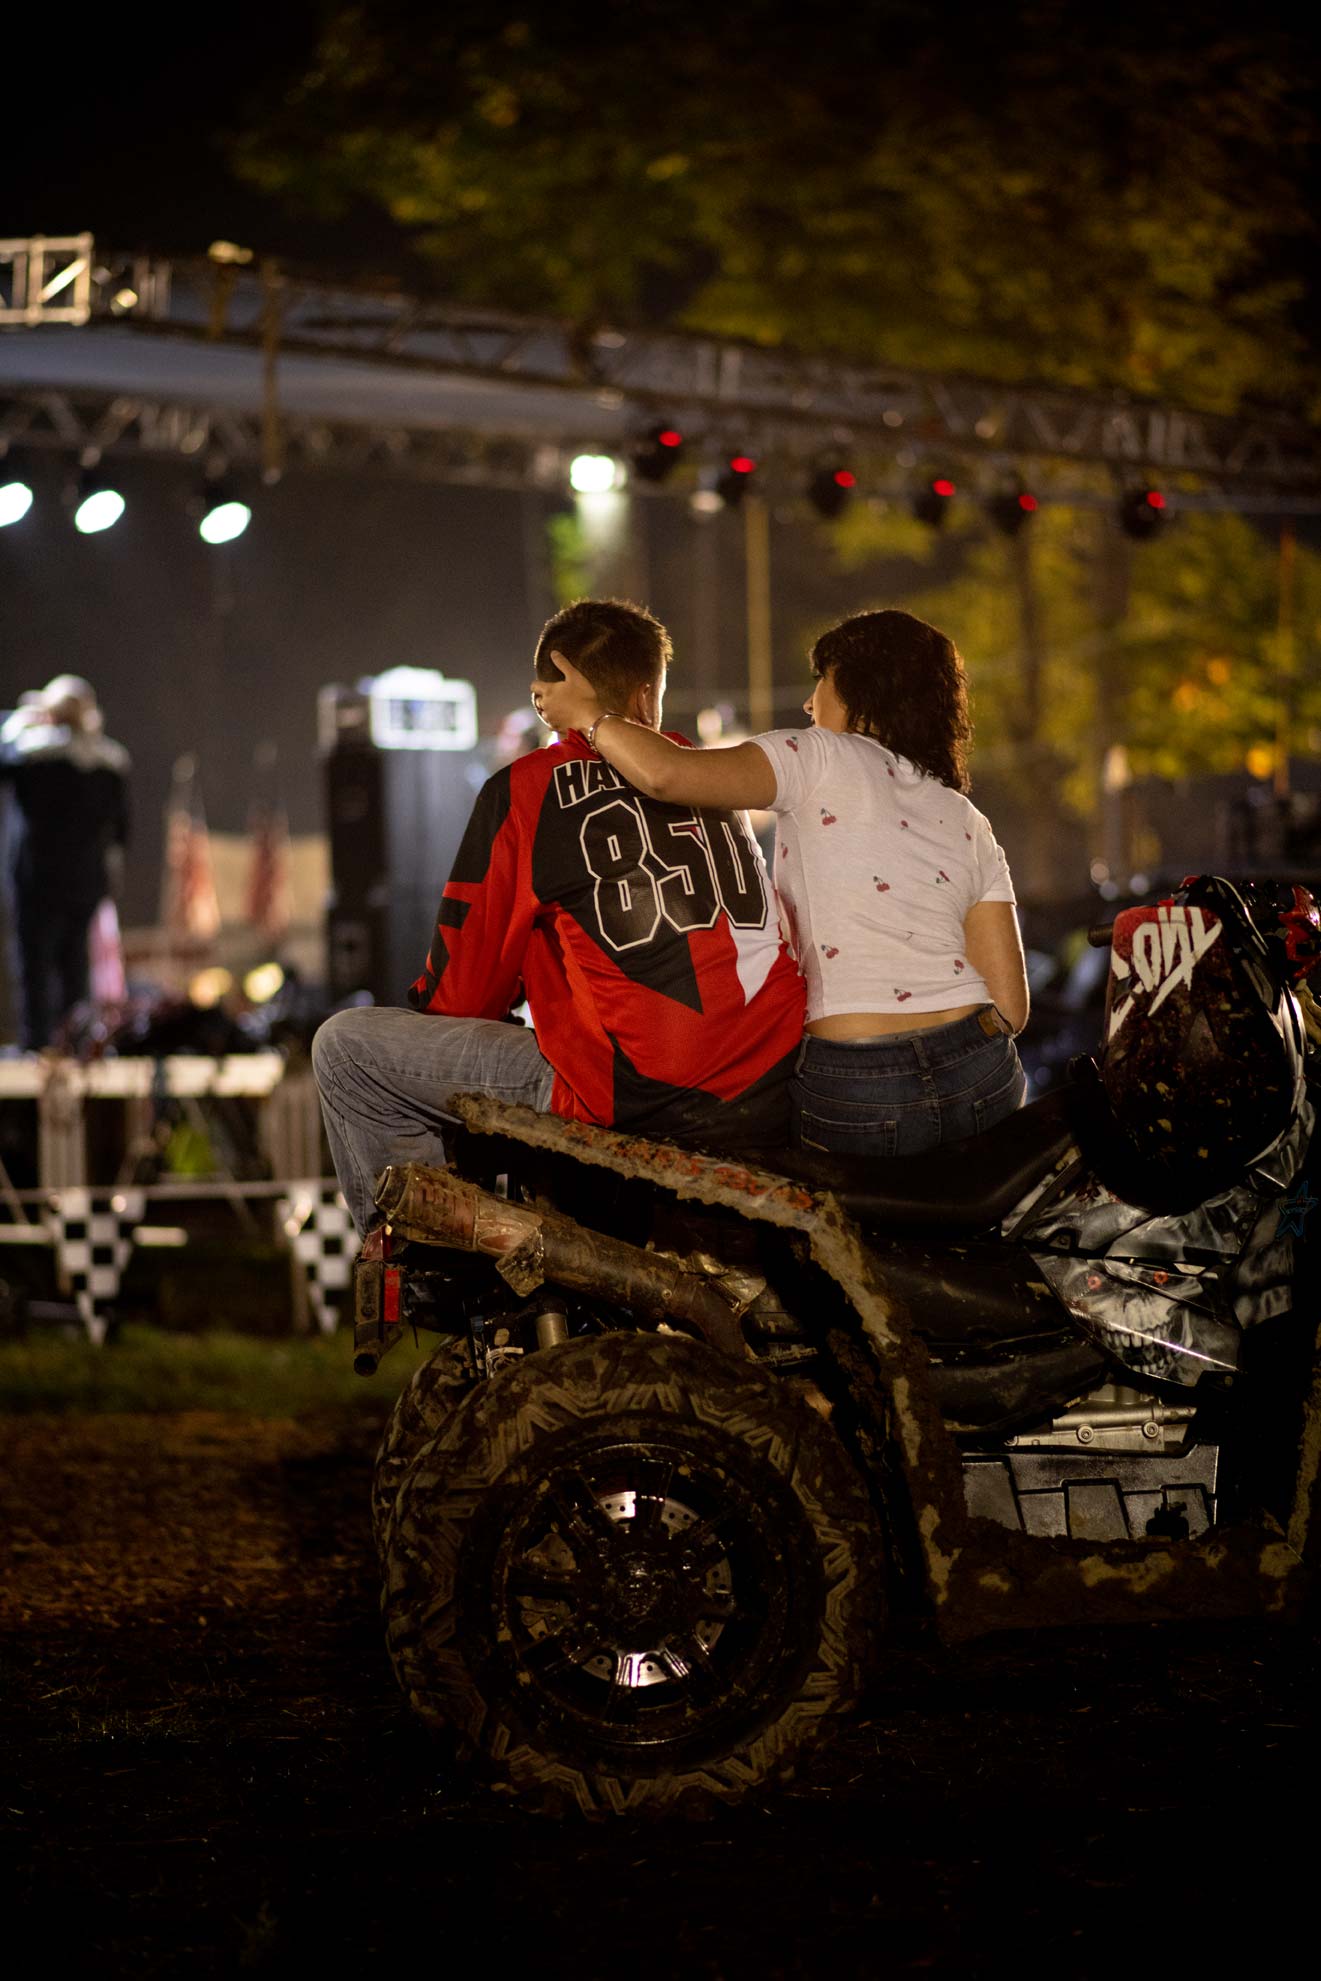 National Trailfest: Two festival goers share a romantic moment as they watch festivities from an ATV